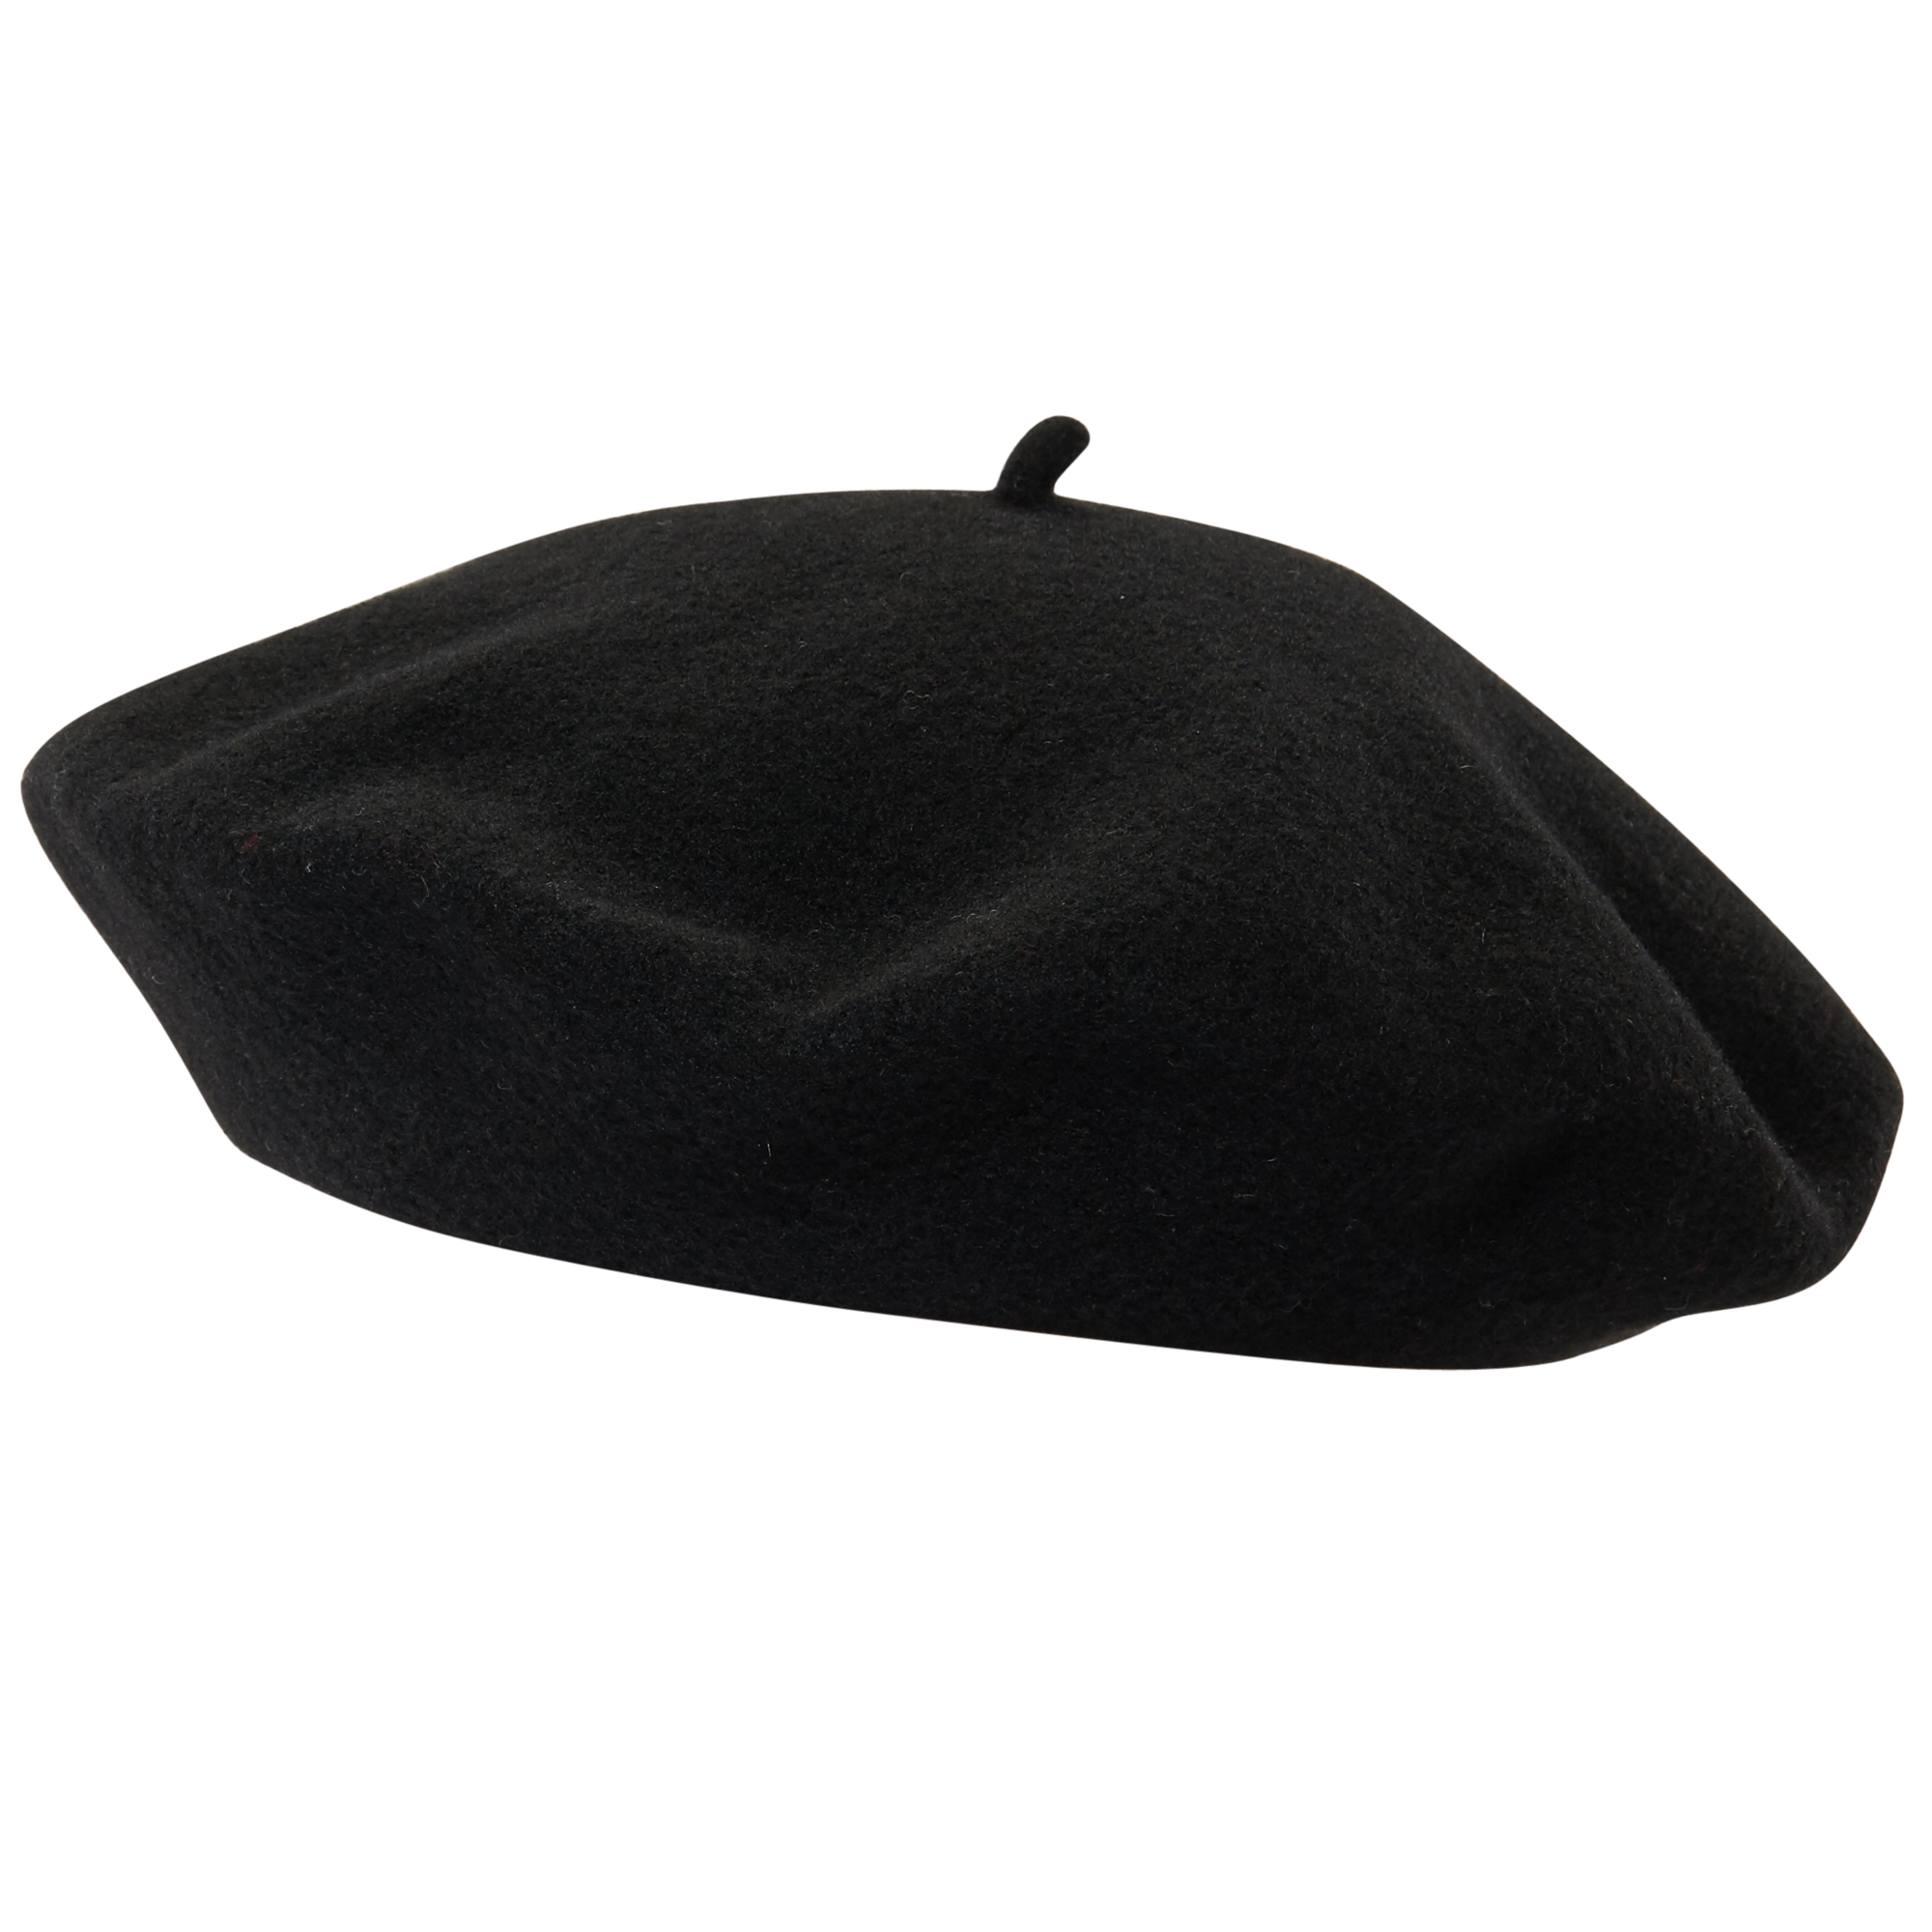 French Hat Beret.png